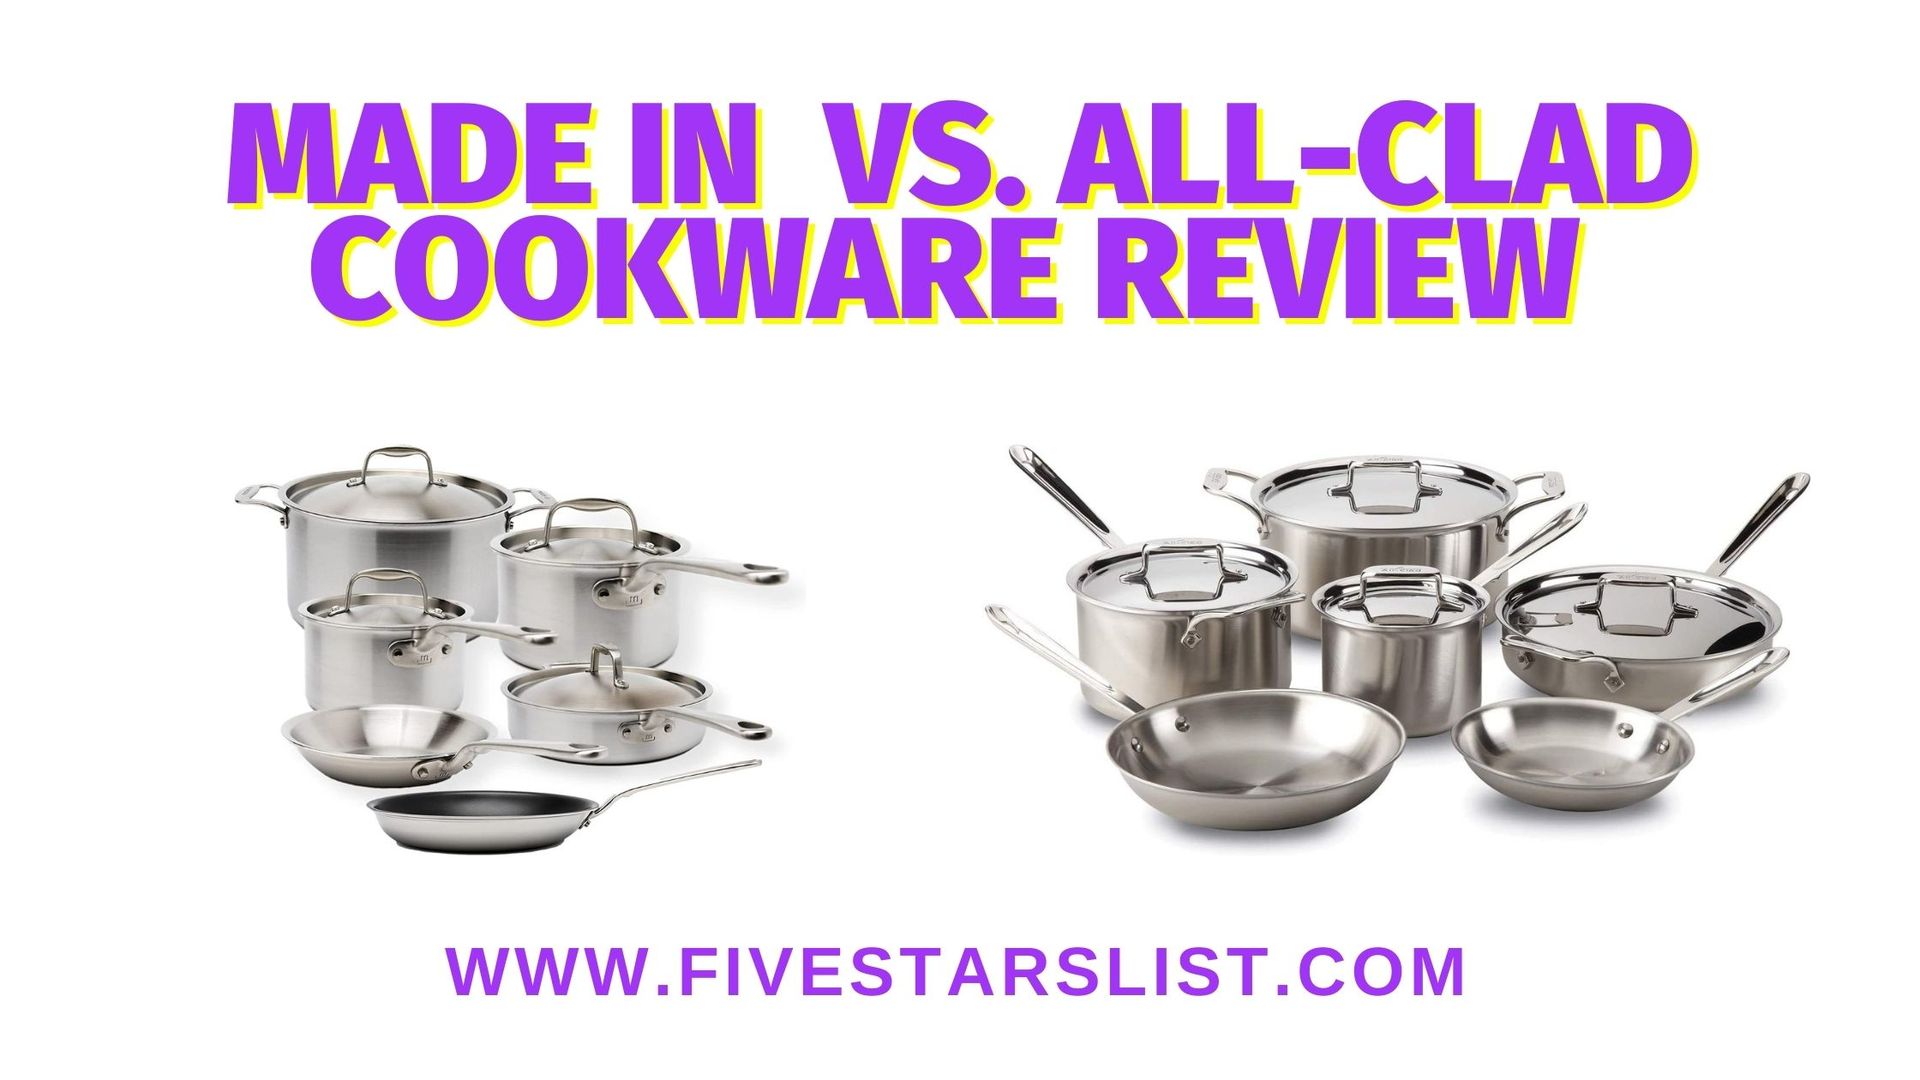 Made in Cookware Review vs. All-Clad